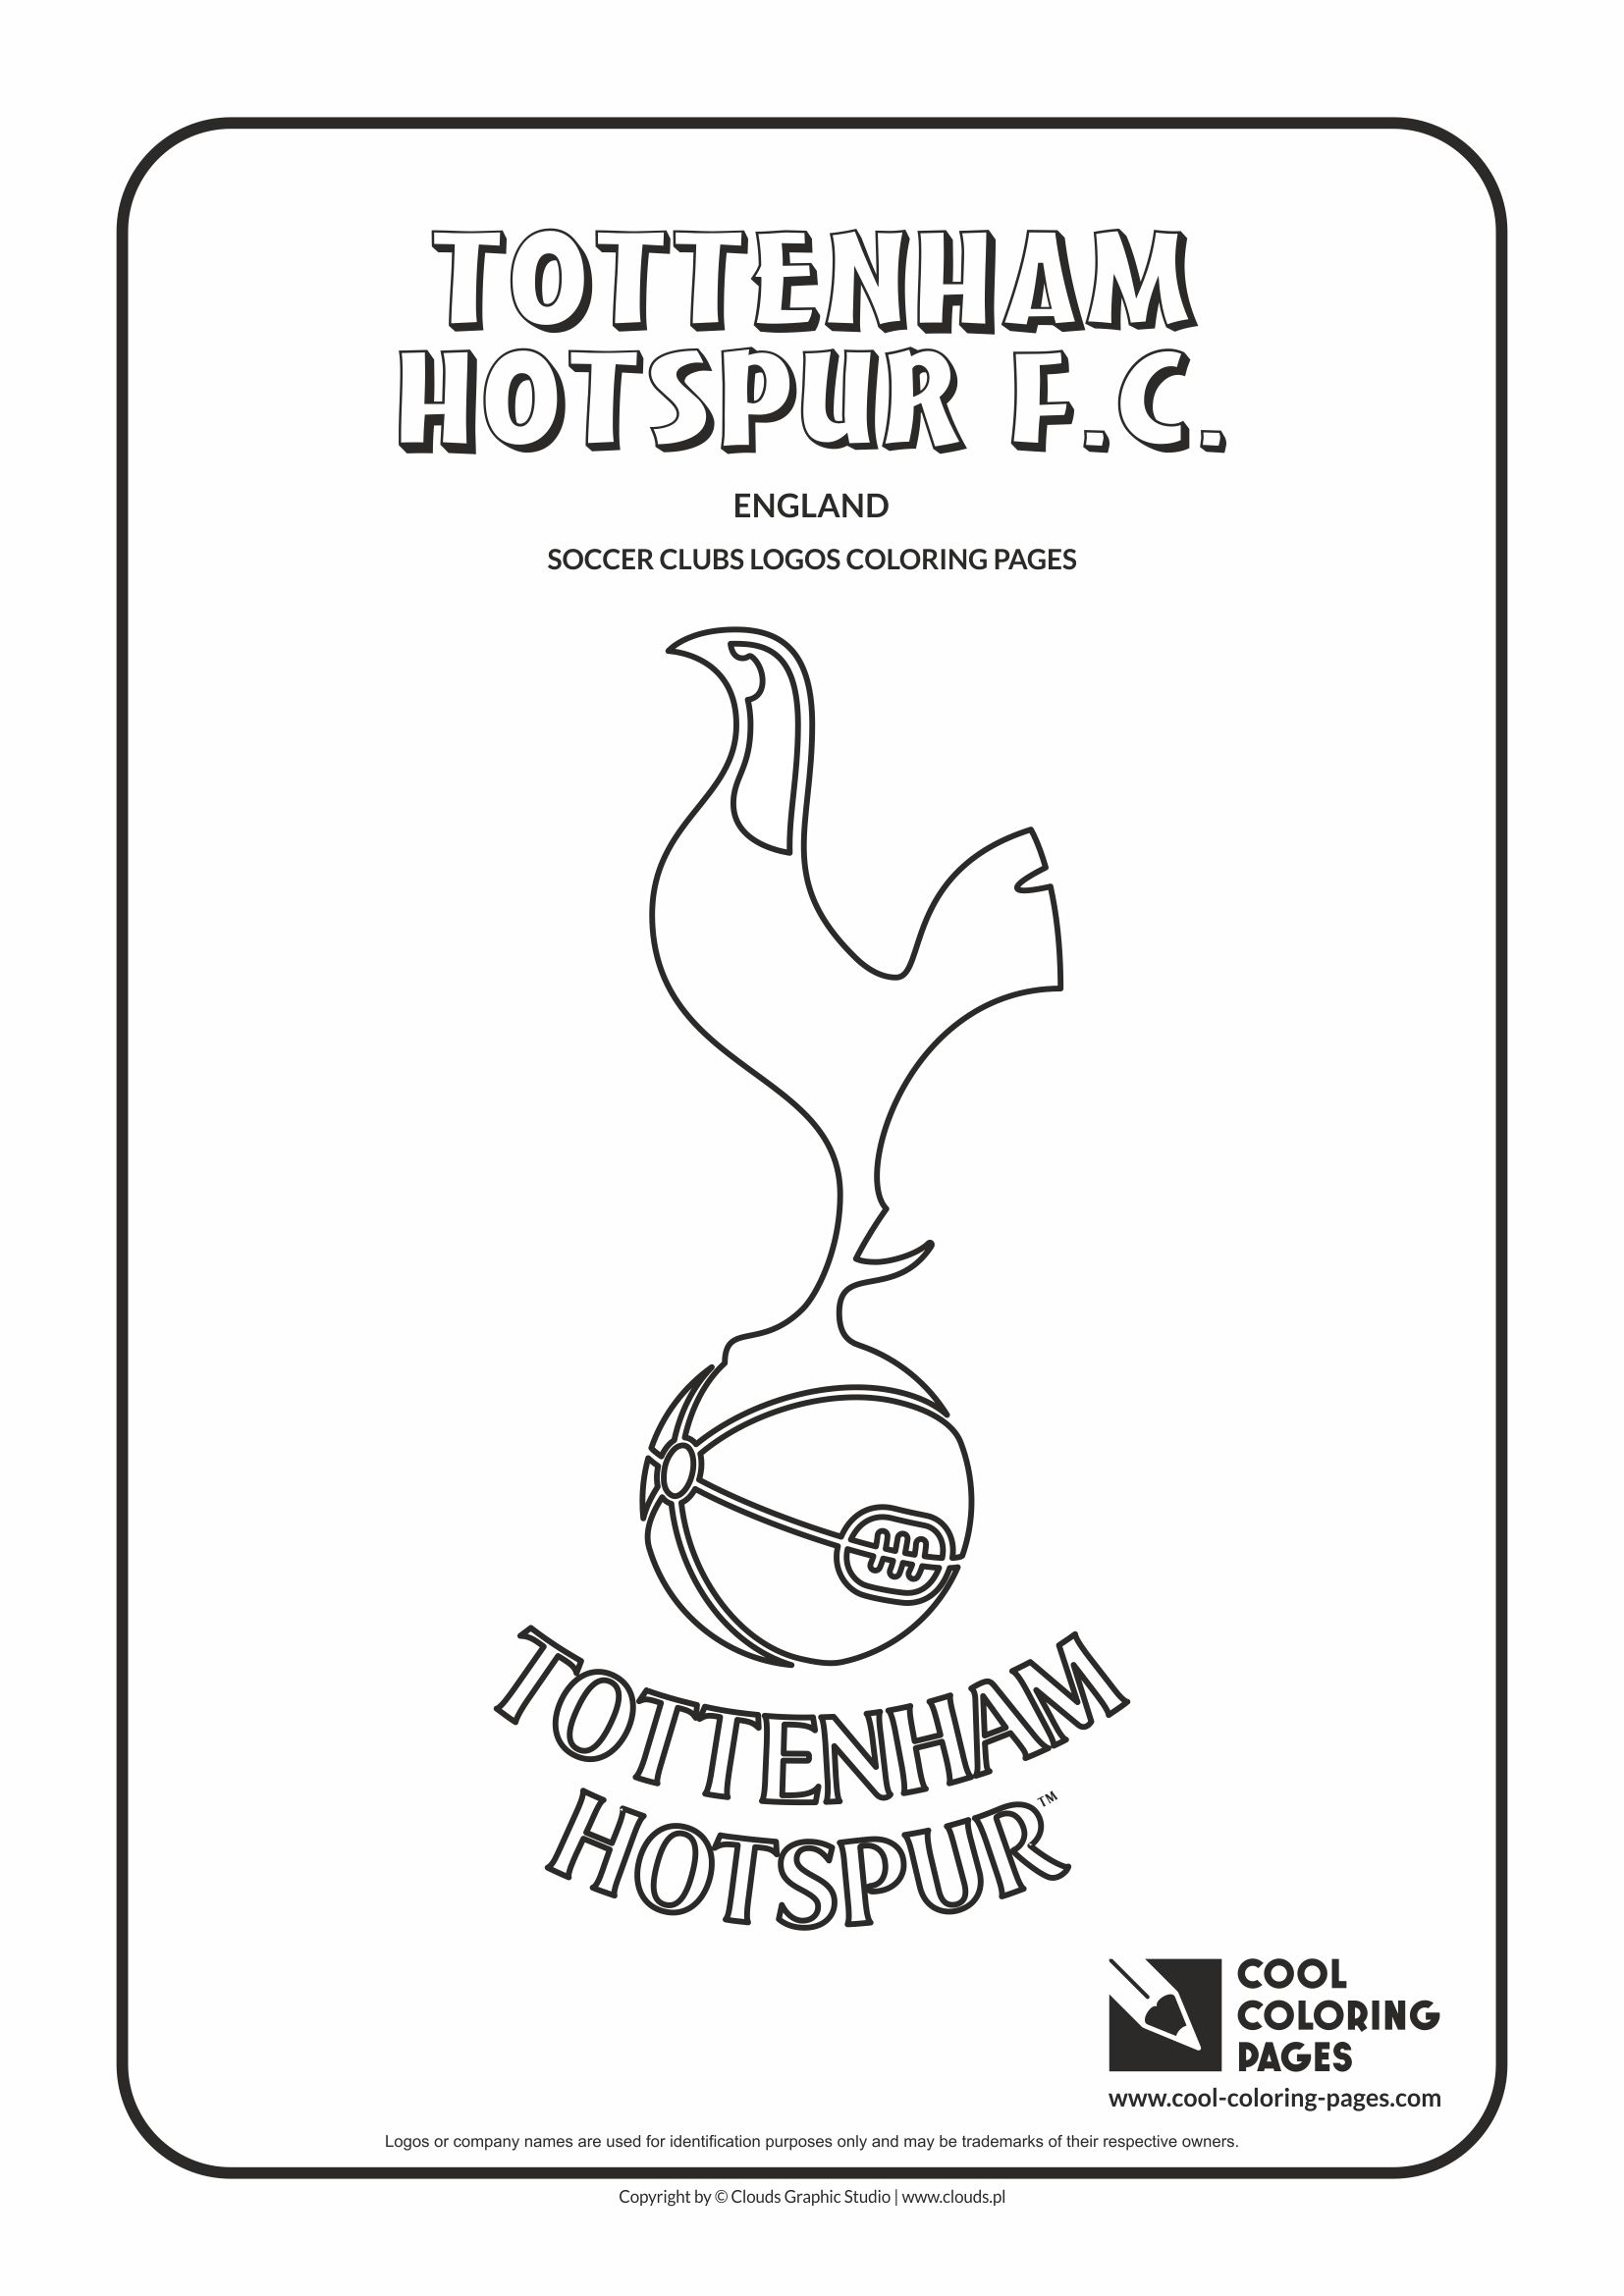 Cool Coloring Pages Soccer clubs logos - Cool Coloring Pages | Free